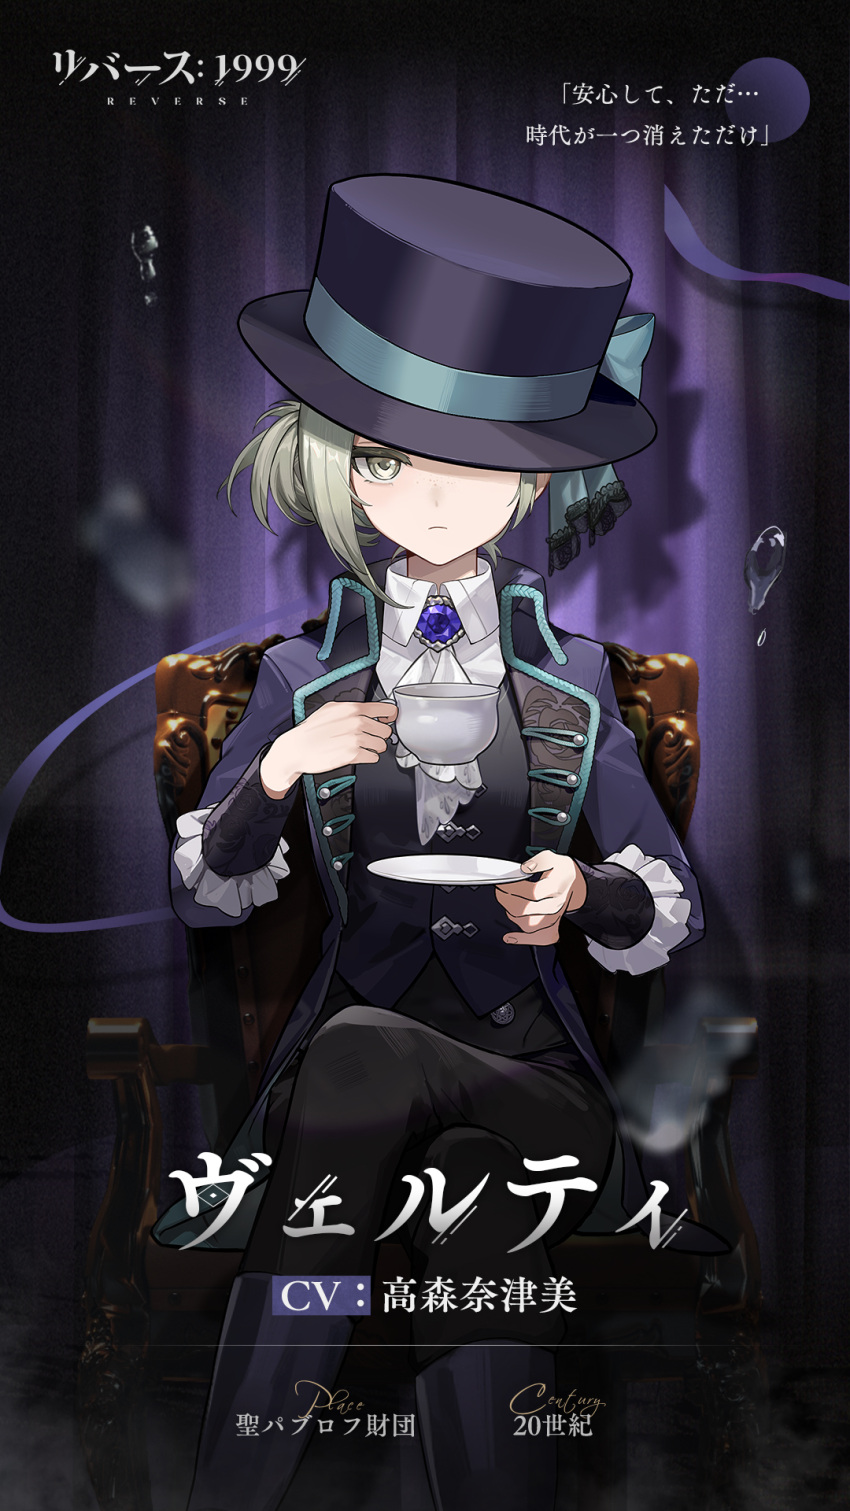 1girl crossed_legs cup expressionless grey_eyes grey_hair hat highres holding holding_cup holding_saucer looking_at_viewer official_art on_chair purple_headwear reverse:1999 ribbon saucer sitting solo suit teacup top_hat vertin_(reverse:1999)